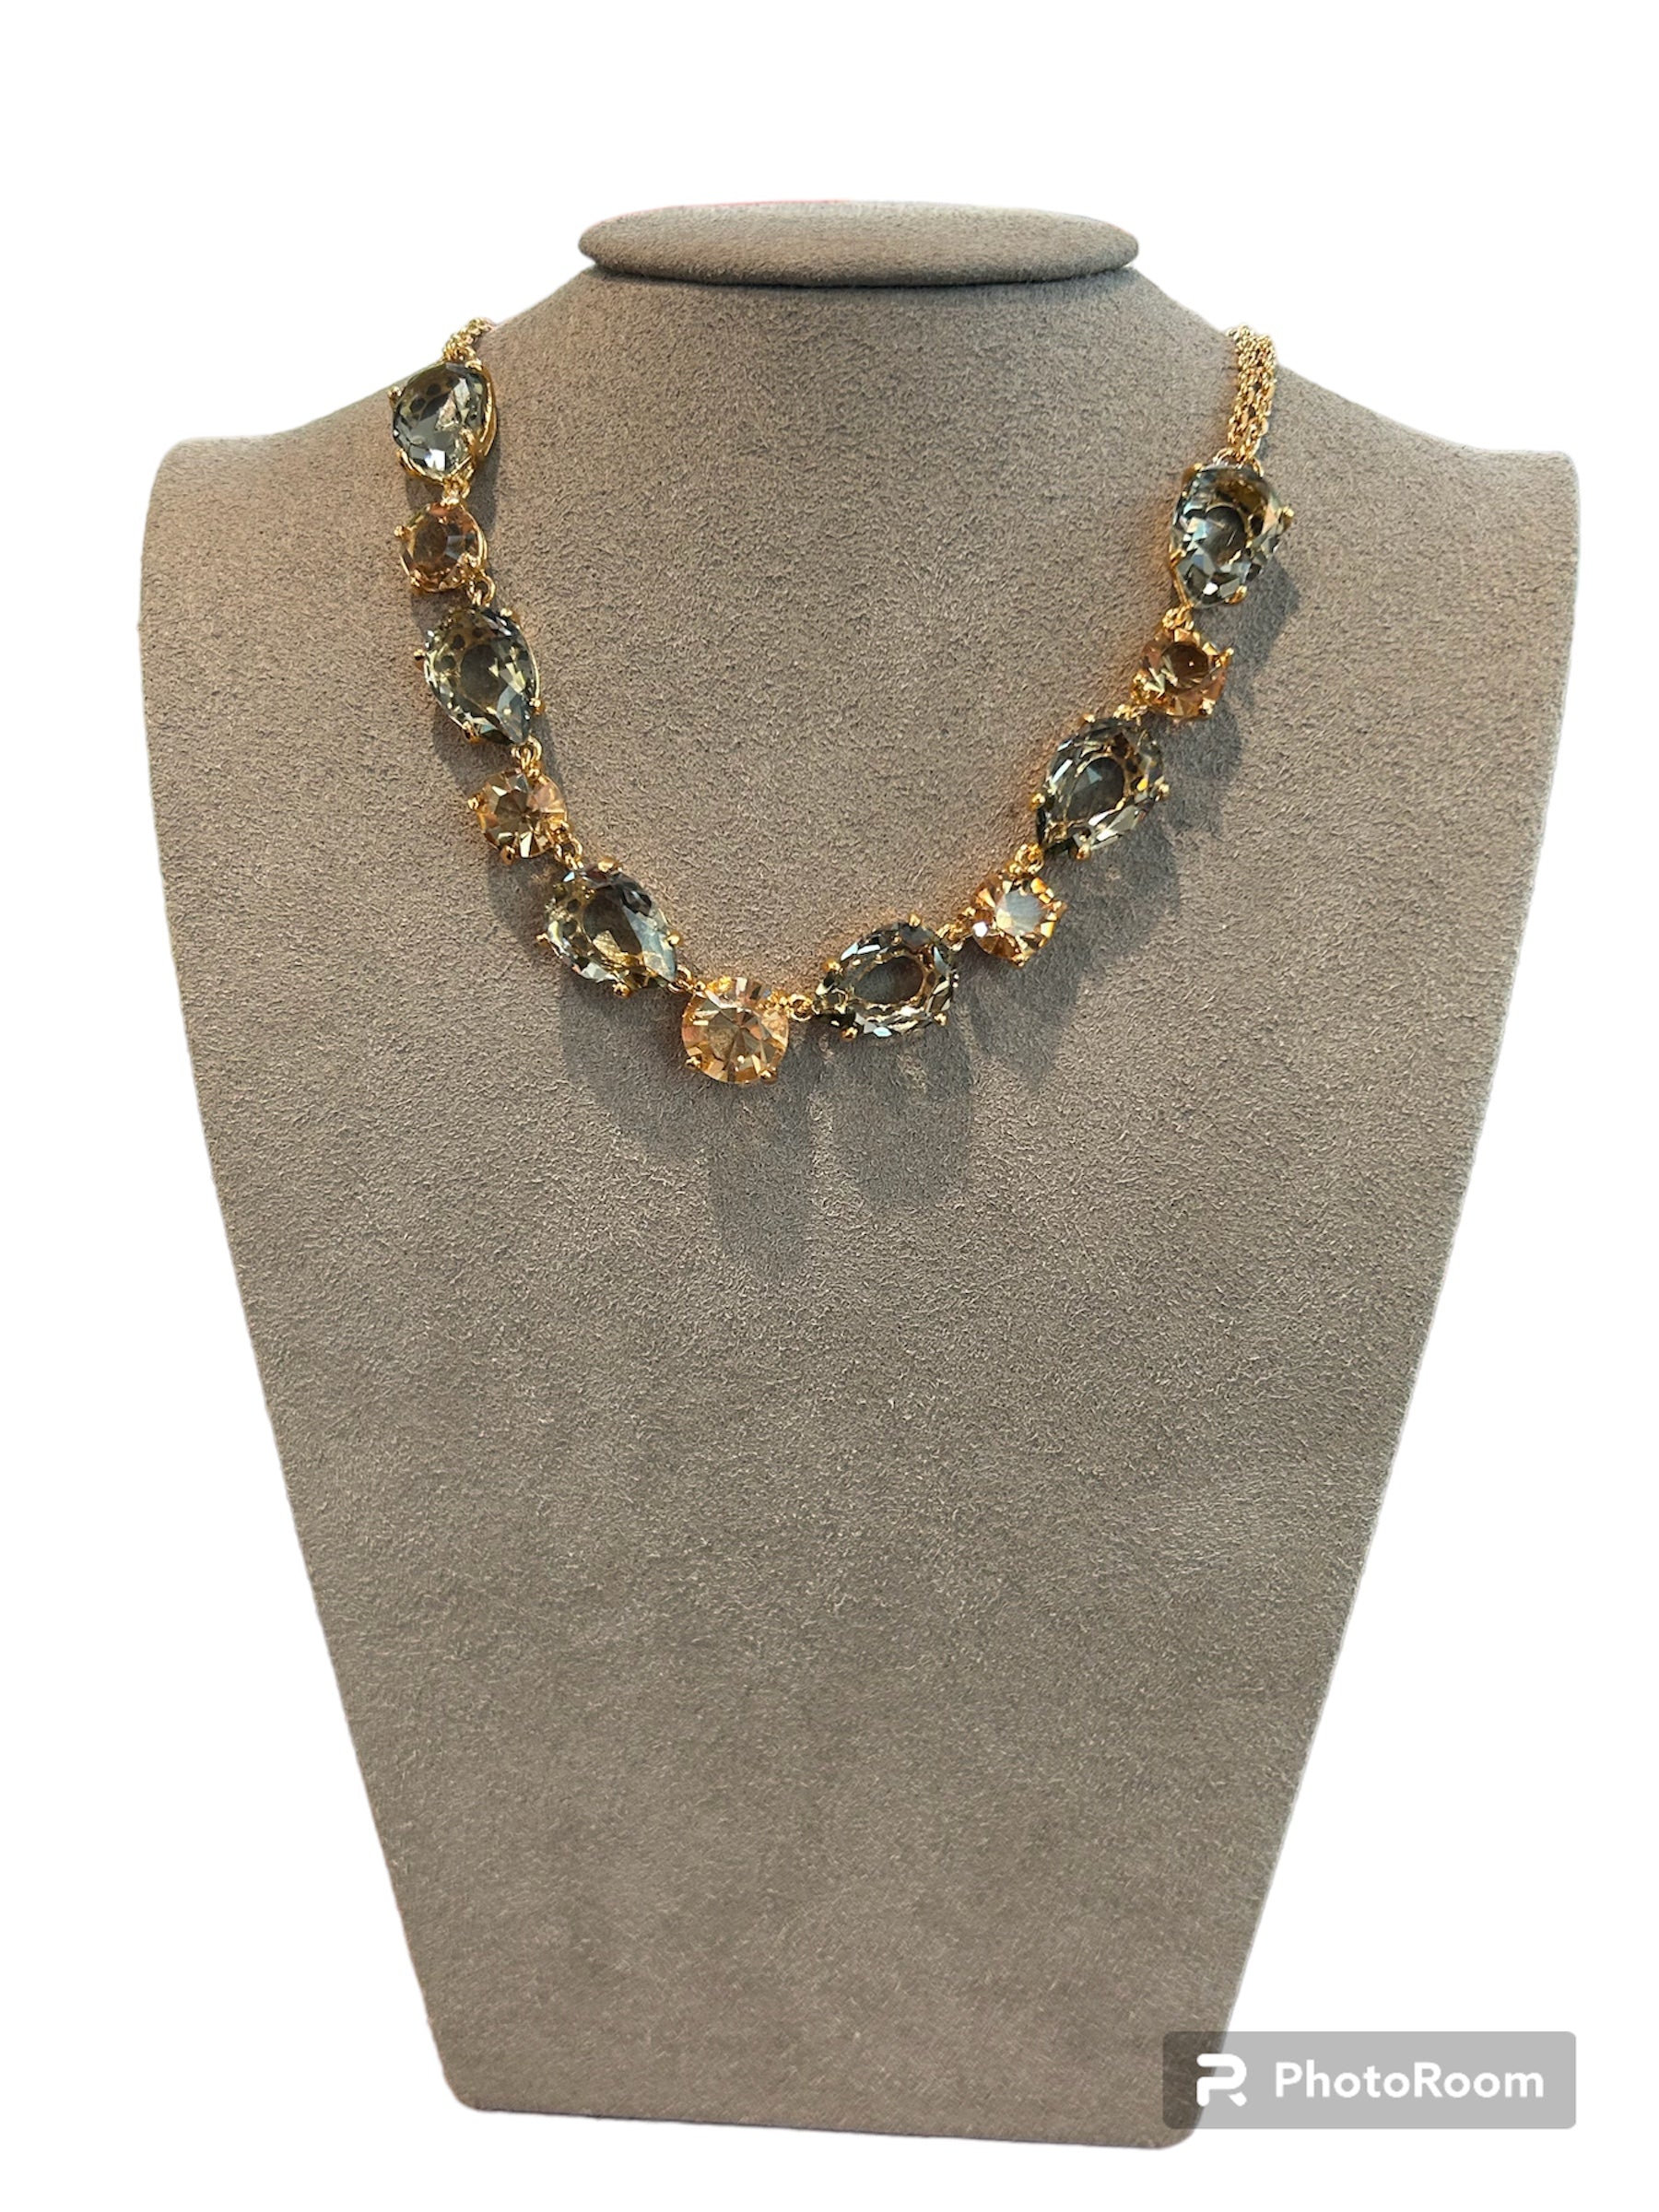 IL Mio Re - Gilded bronze necklace with blue and yellow stones - ILMIORE CL 022